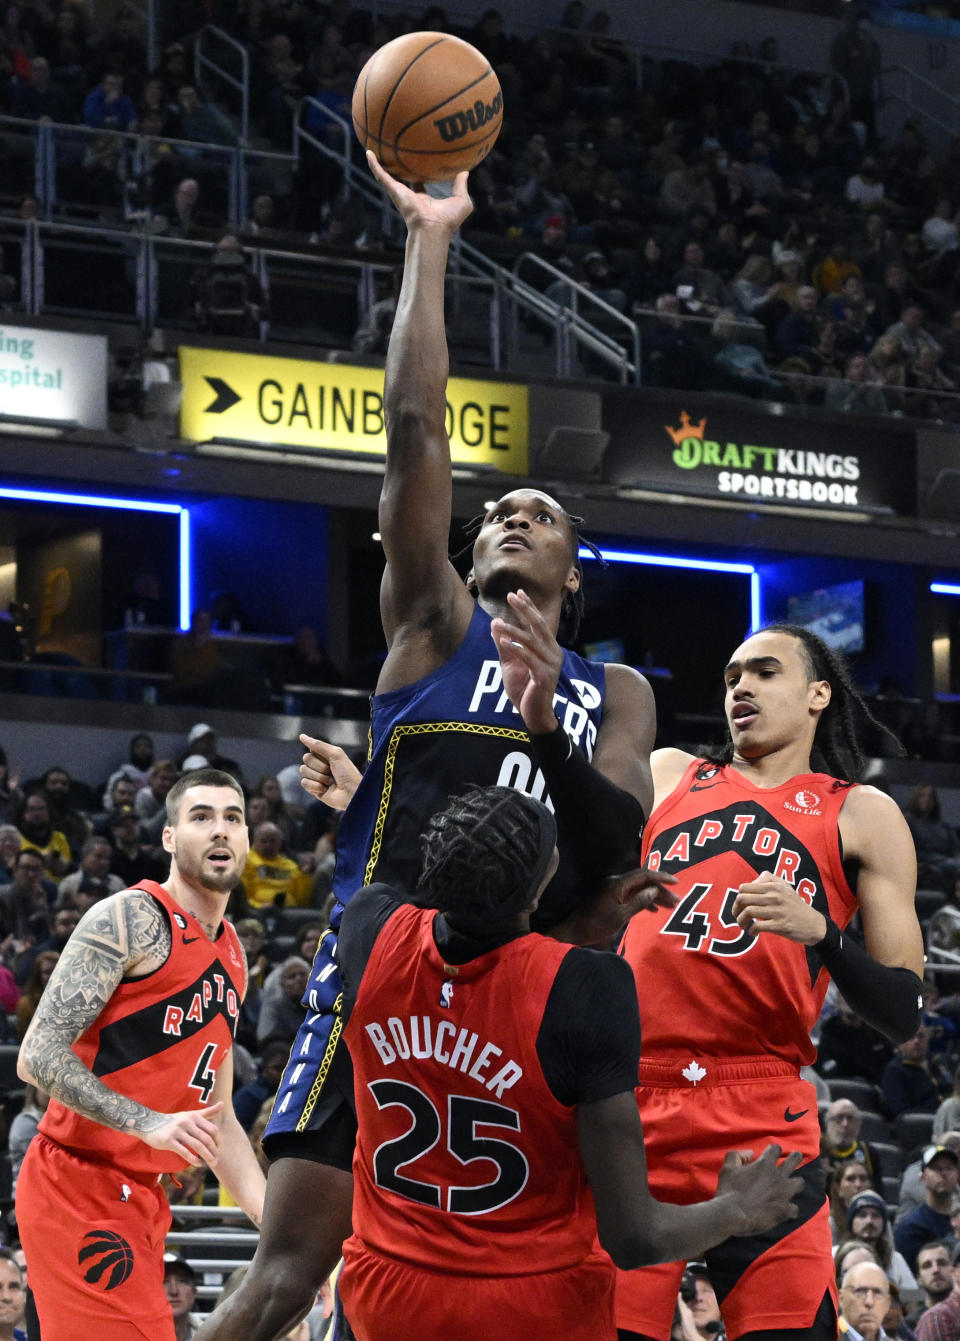 Indiana Pacers guard Bennedict Mathurin (00) shoots over Toronto Raptors forward Chris Boucher (25) during the second half of an NBA basketball game, Saturday, Nov. 12, 2022, in Indianapolis, Ind. (AP Photo/Marc Lebryk)